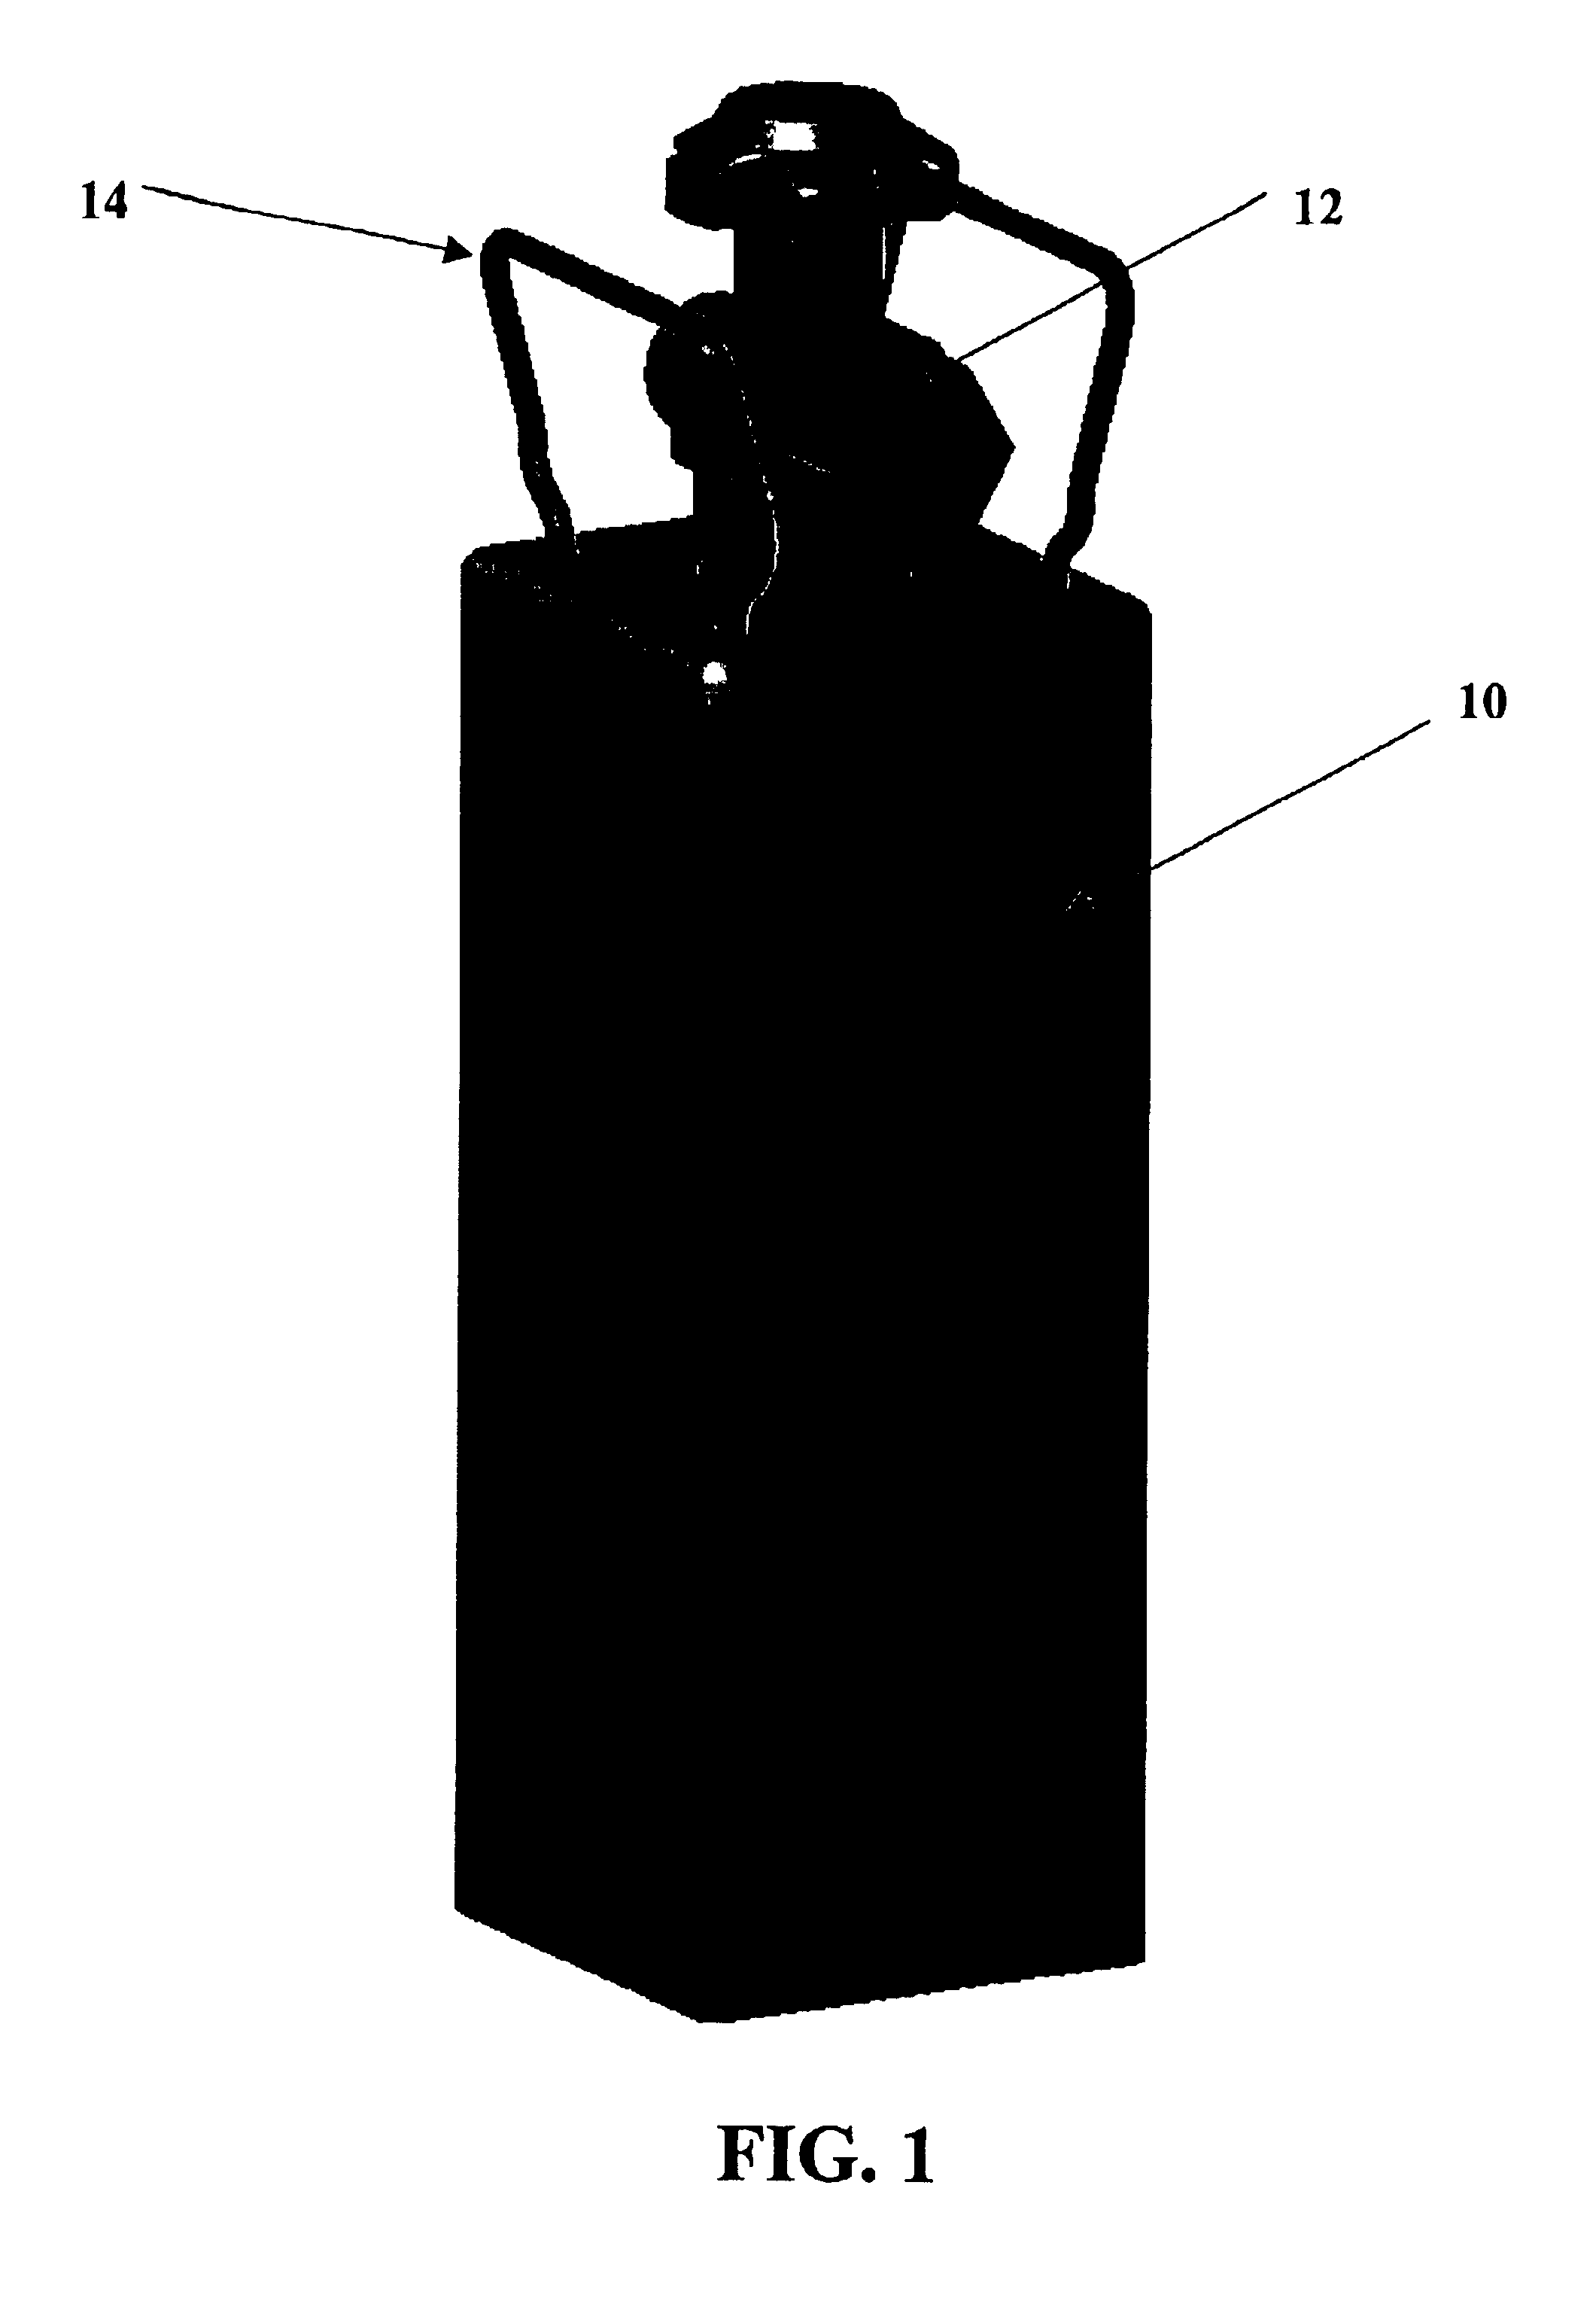 Rectangular parallelepiped fluid storage and dispensing vessel